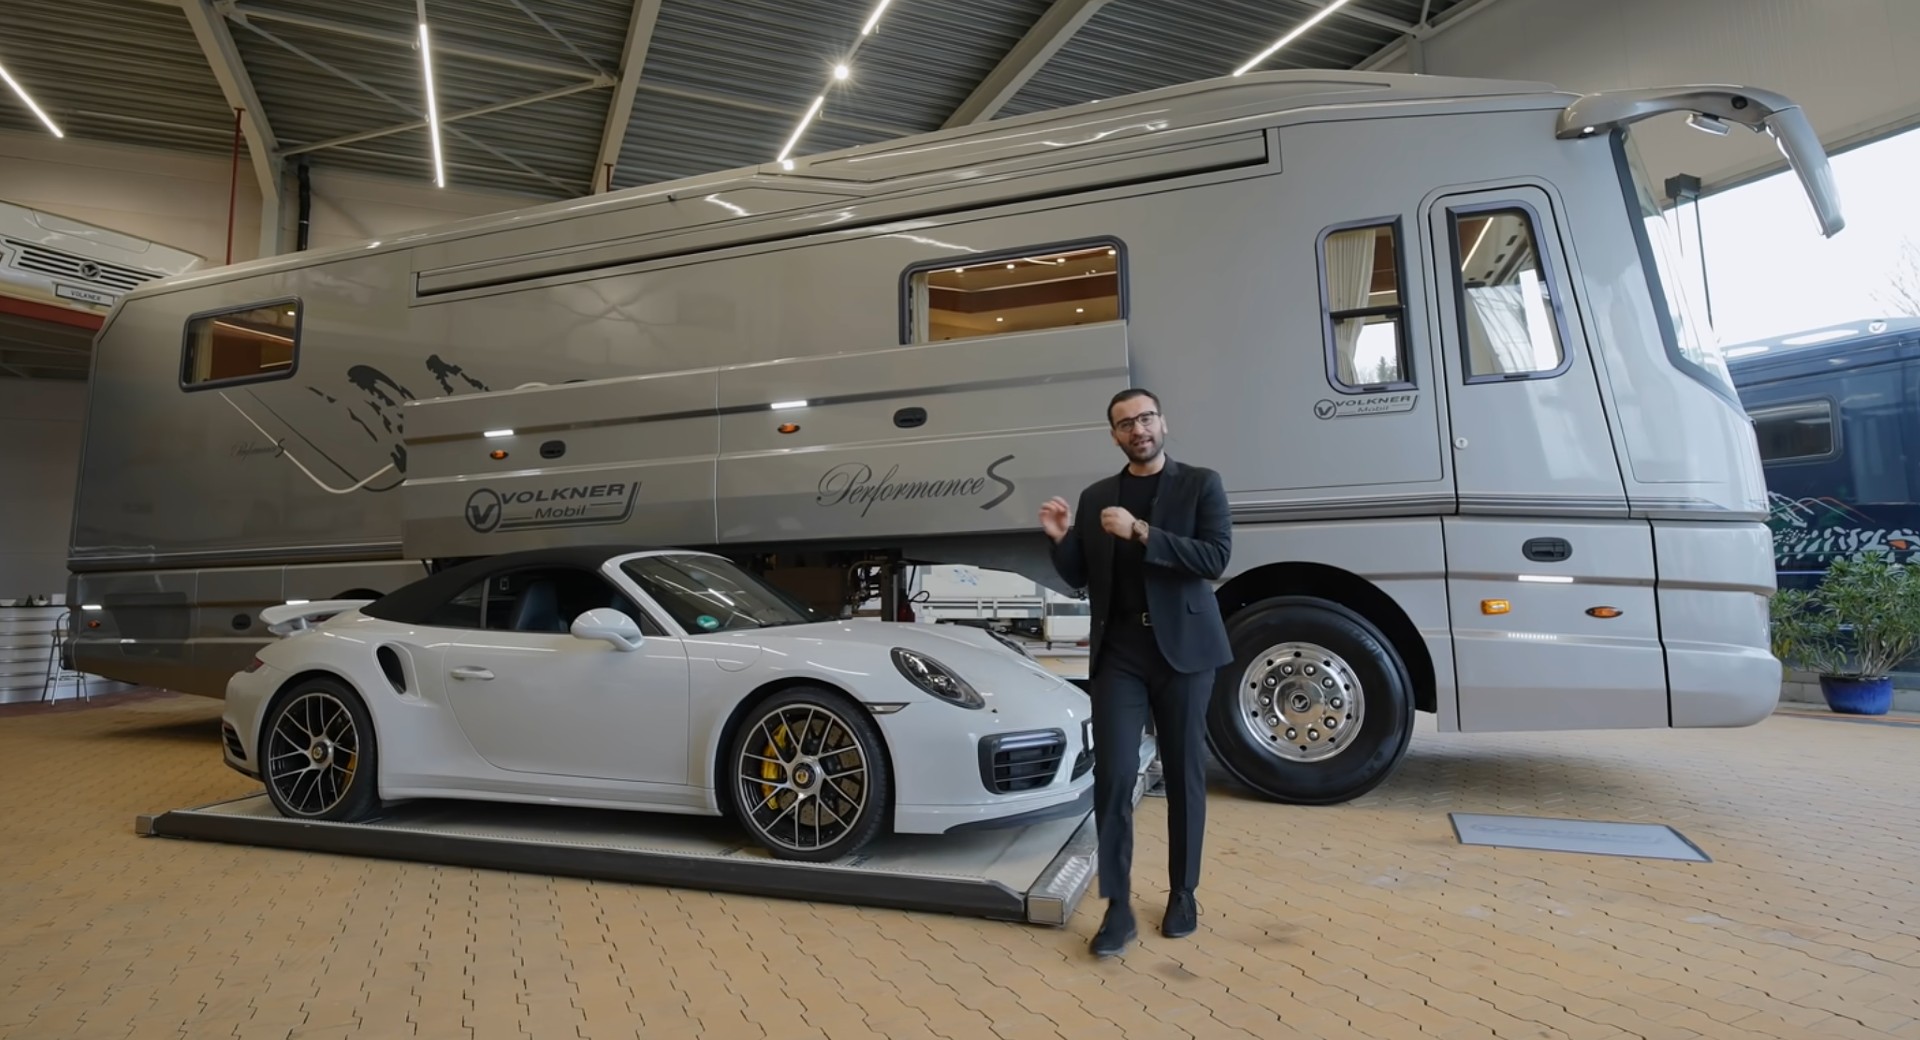 Take A Tour Of Volkner Mobil's $ Million Motorhome With A Garage For  Your Porsche | Carscoops